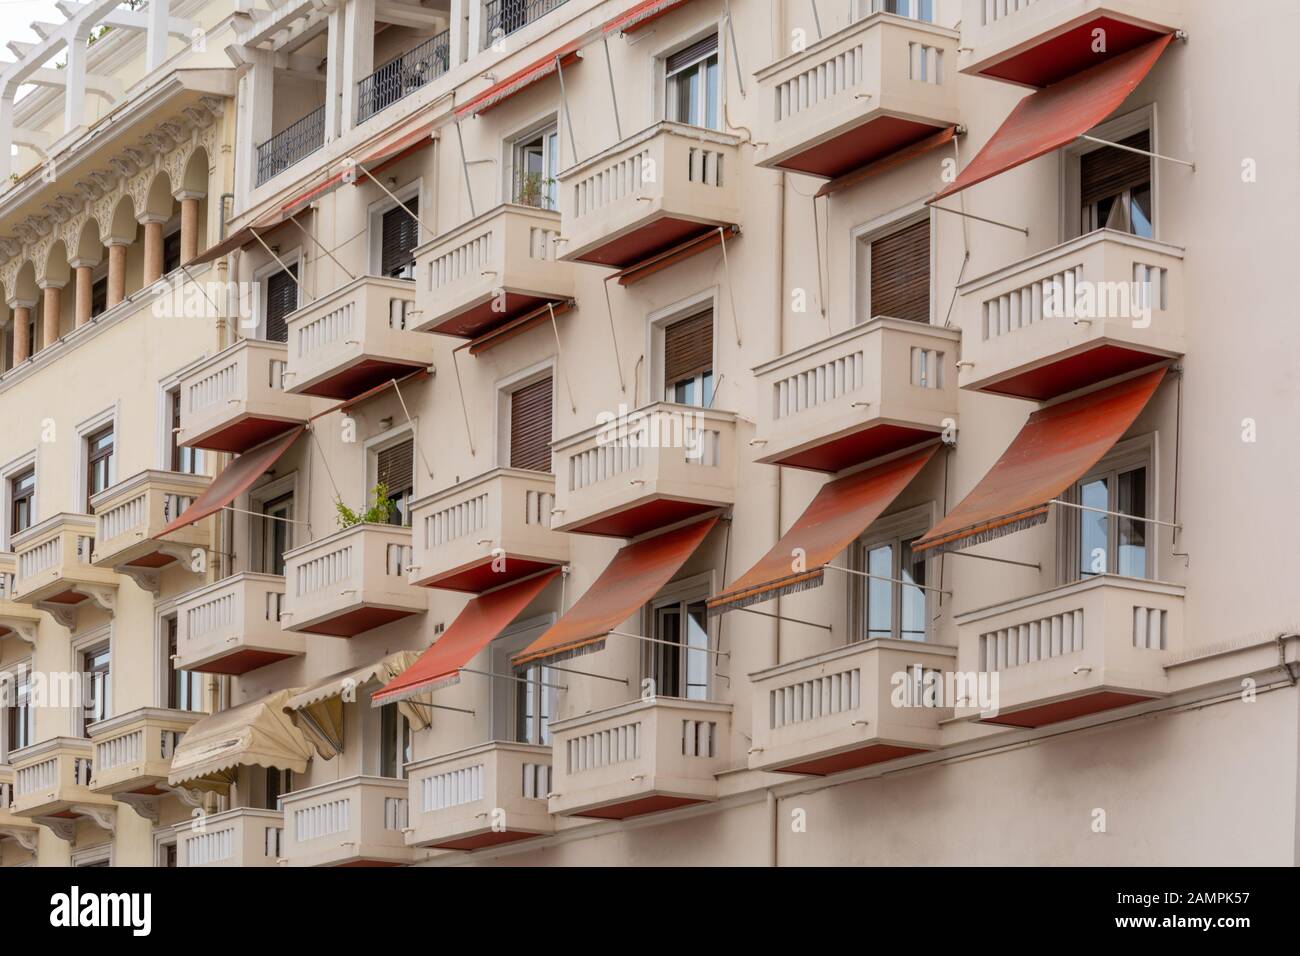 Balconies in the center of Aristotelous Square, Thessaloniki, Greece Stock Photo